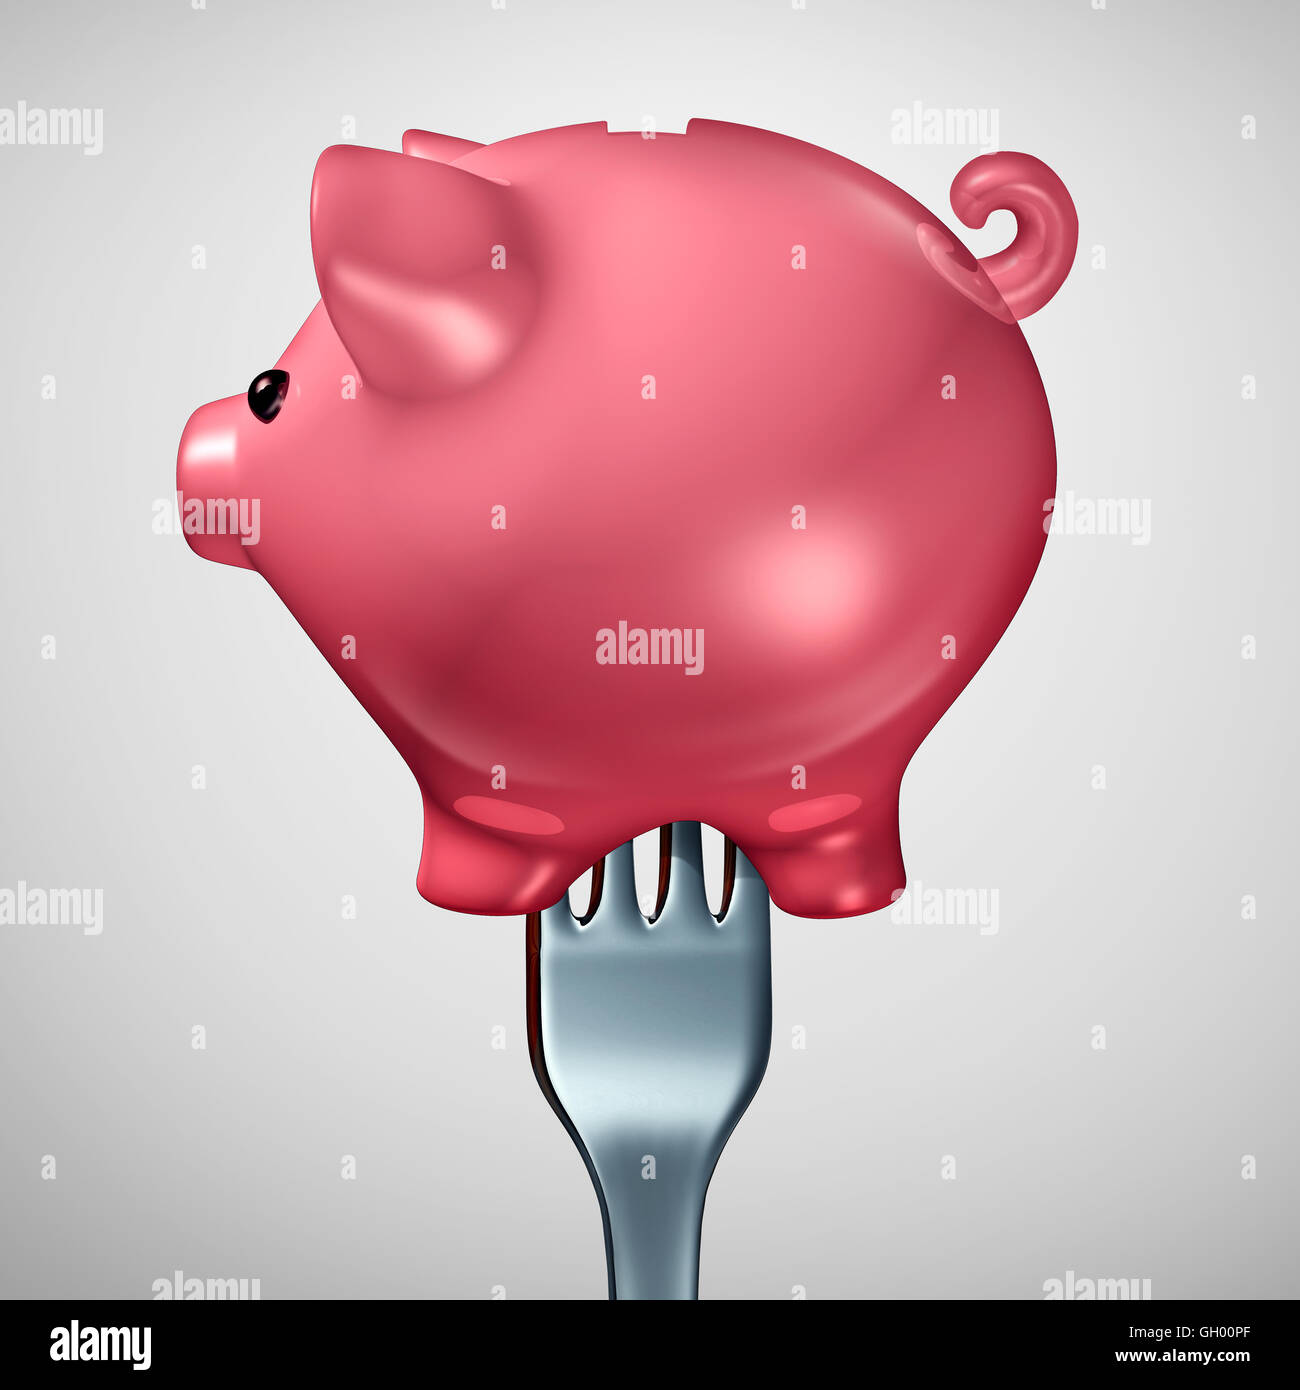 Economic investment appetite as a fork inside a financial piggybank symbol or piggy bank icon as a financial concept for greed or investment consumerism as a 3D illustration. Stock Photo